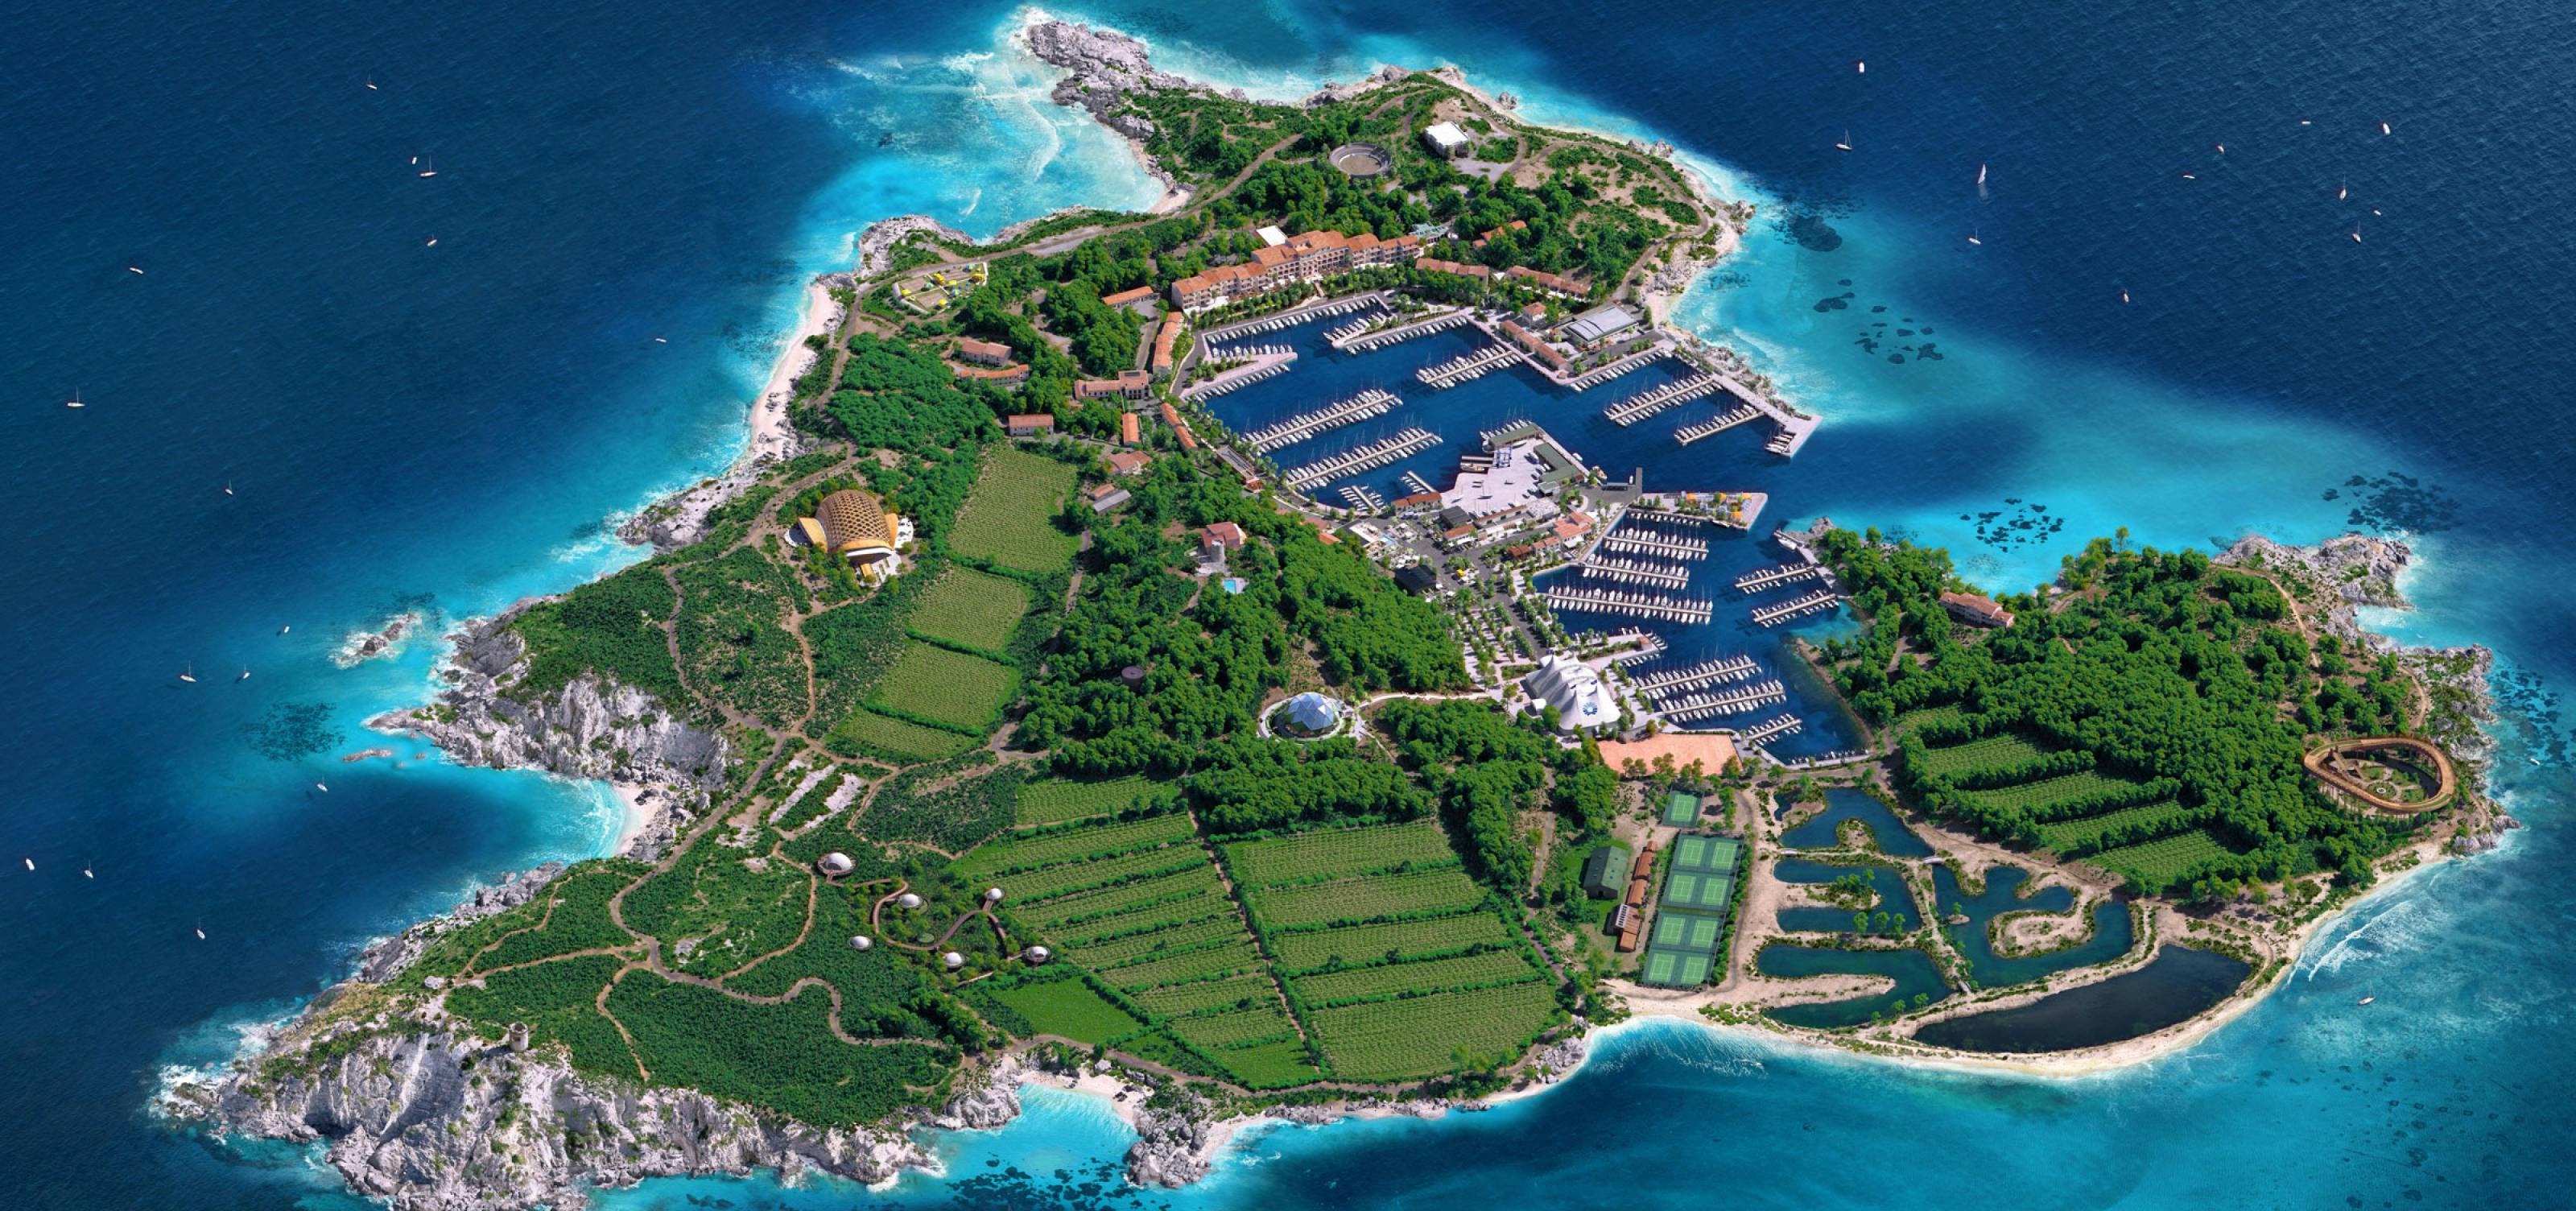 View from above of the island Les Embiez, made in 3D.